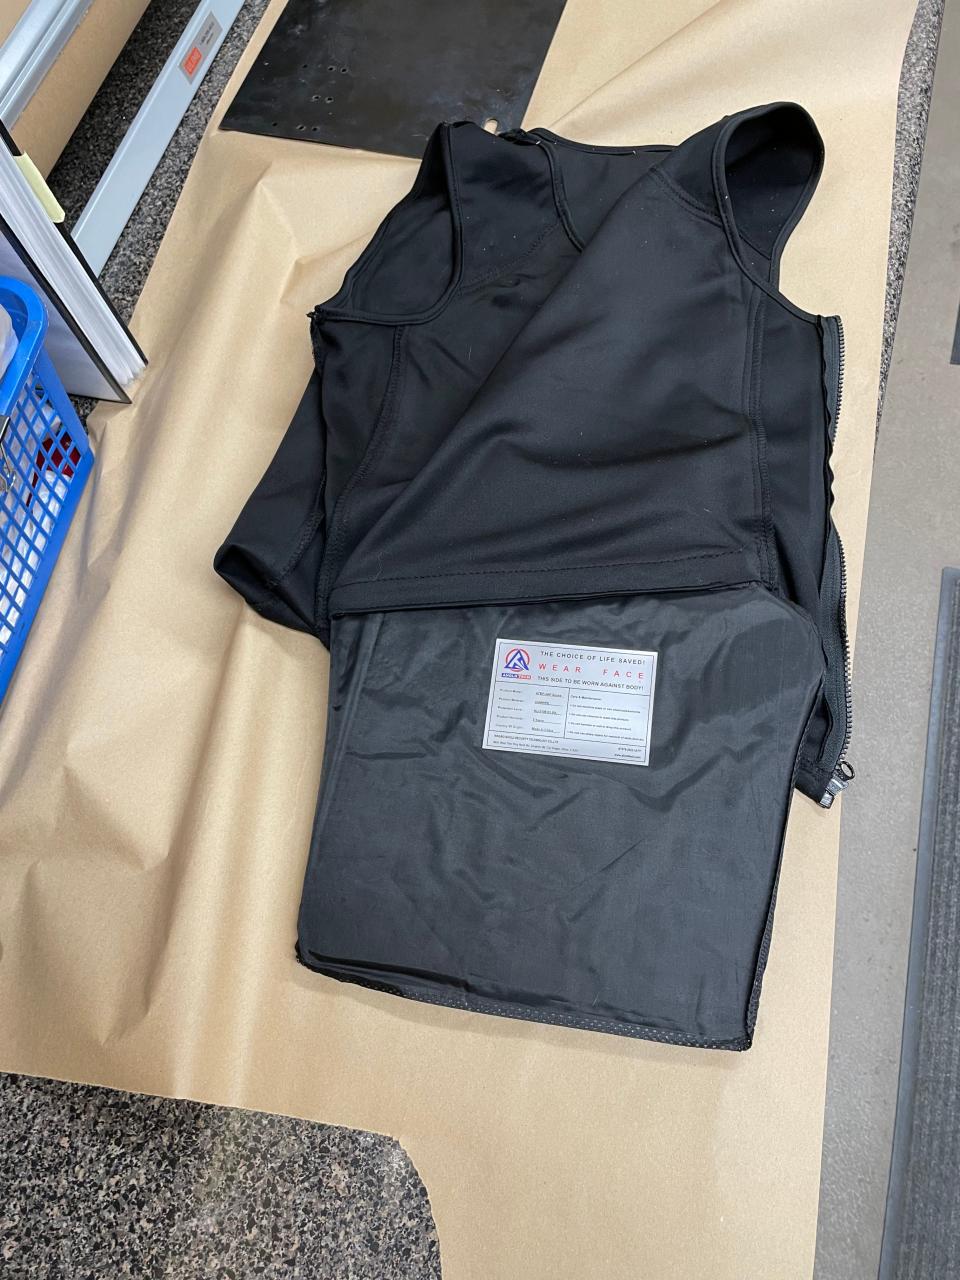 The body armor worn and discarded by assailant Beau Wilson during his shooting spree on North Dustin Avenue in Farmington on May 15, 2023.